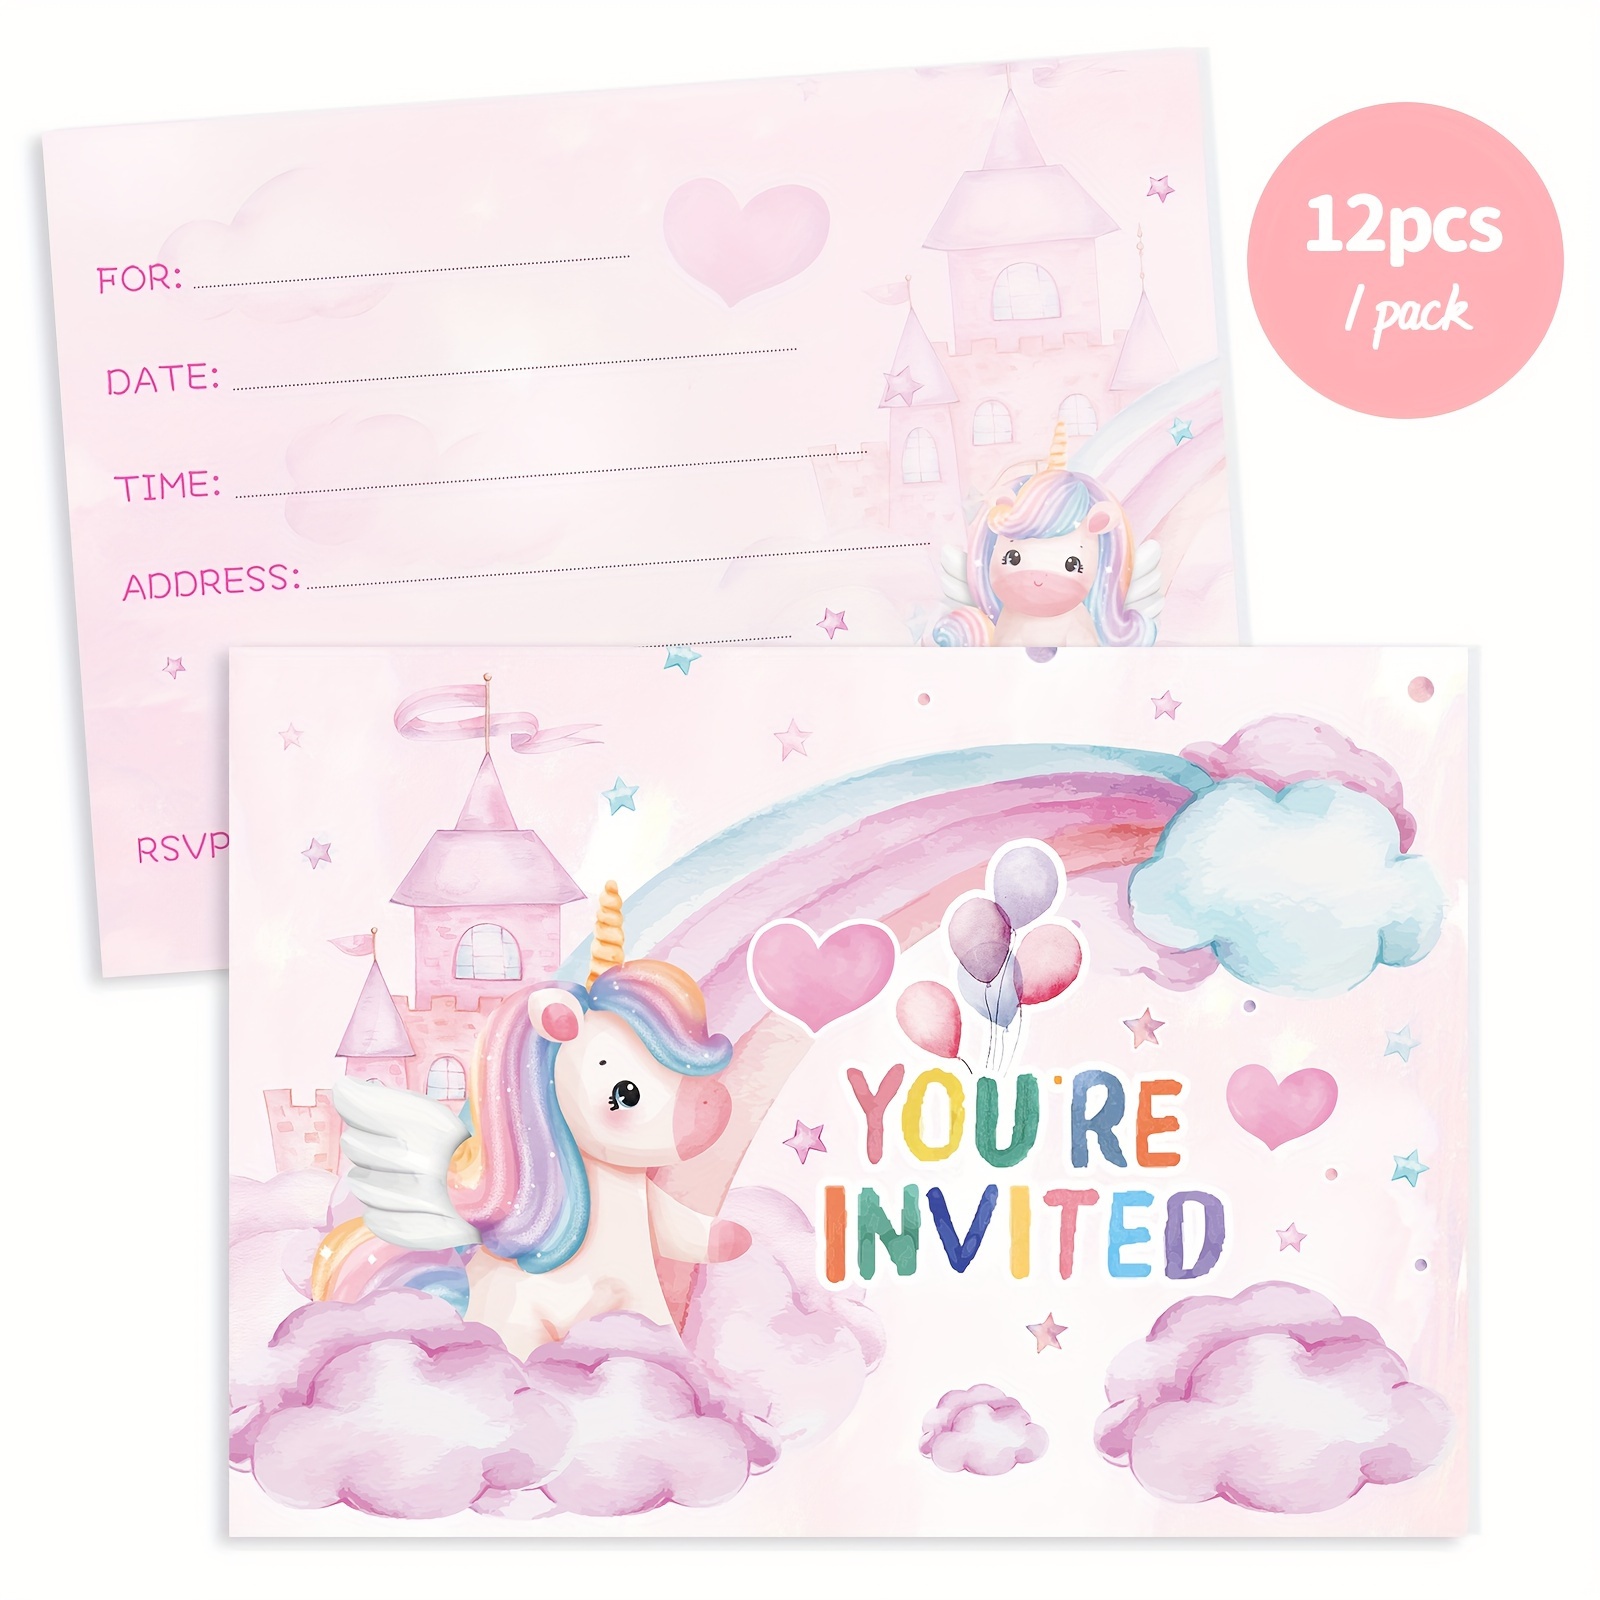 

12pcs/pack, Cute English Cartoon Birthday Party Invitation Card Greeting Card Invitations, Small Business Supplies, Thank You Cards, Birthday Gift, Cards, Unusual Items, Gift Cards